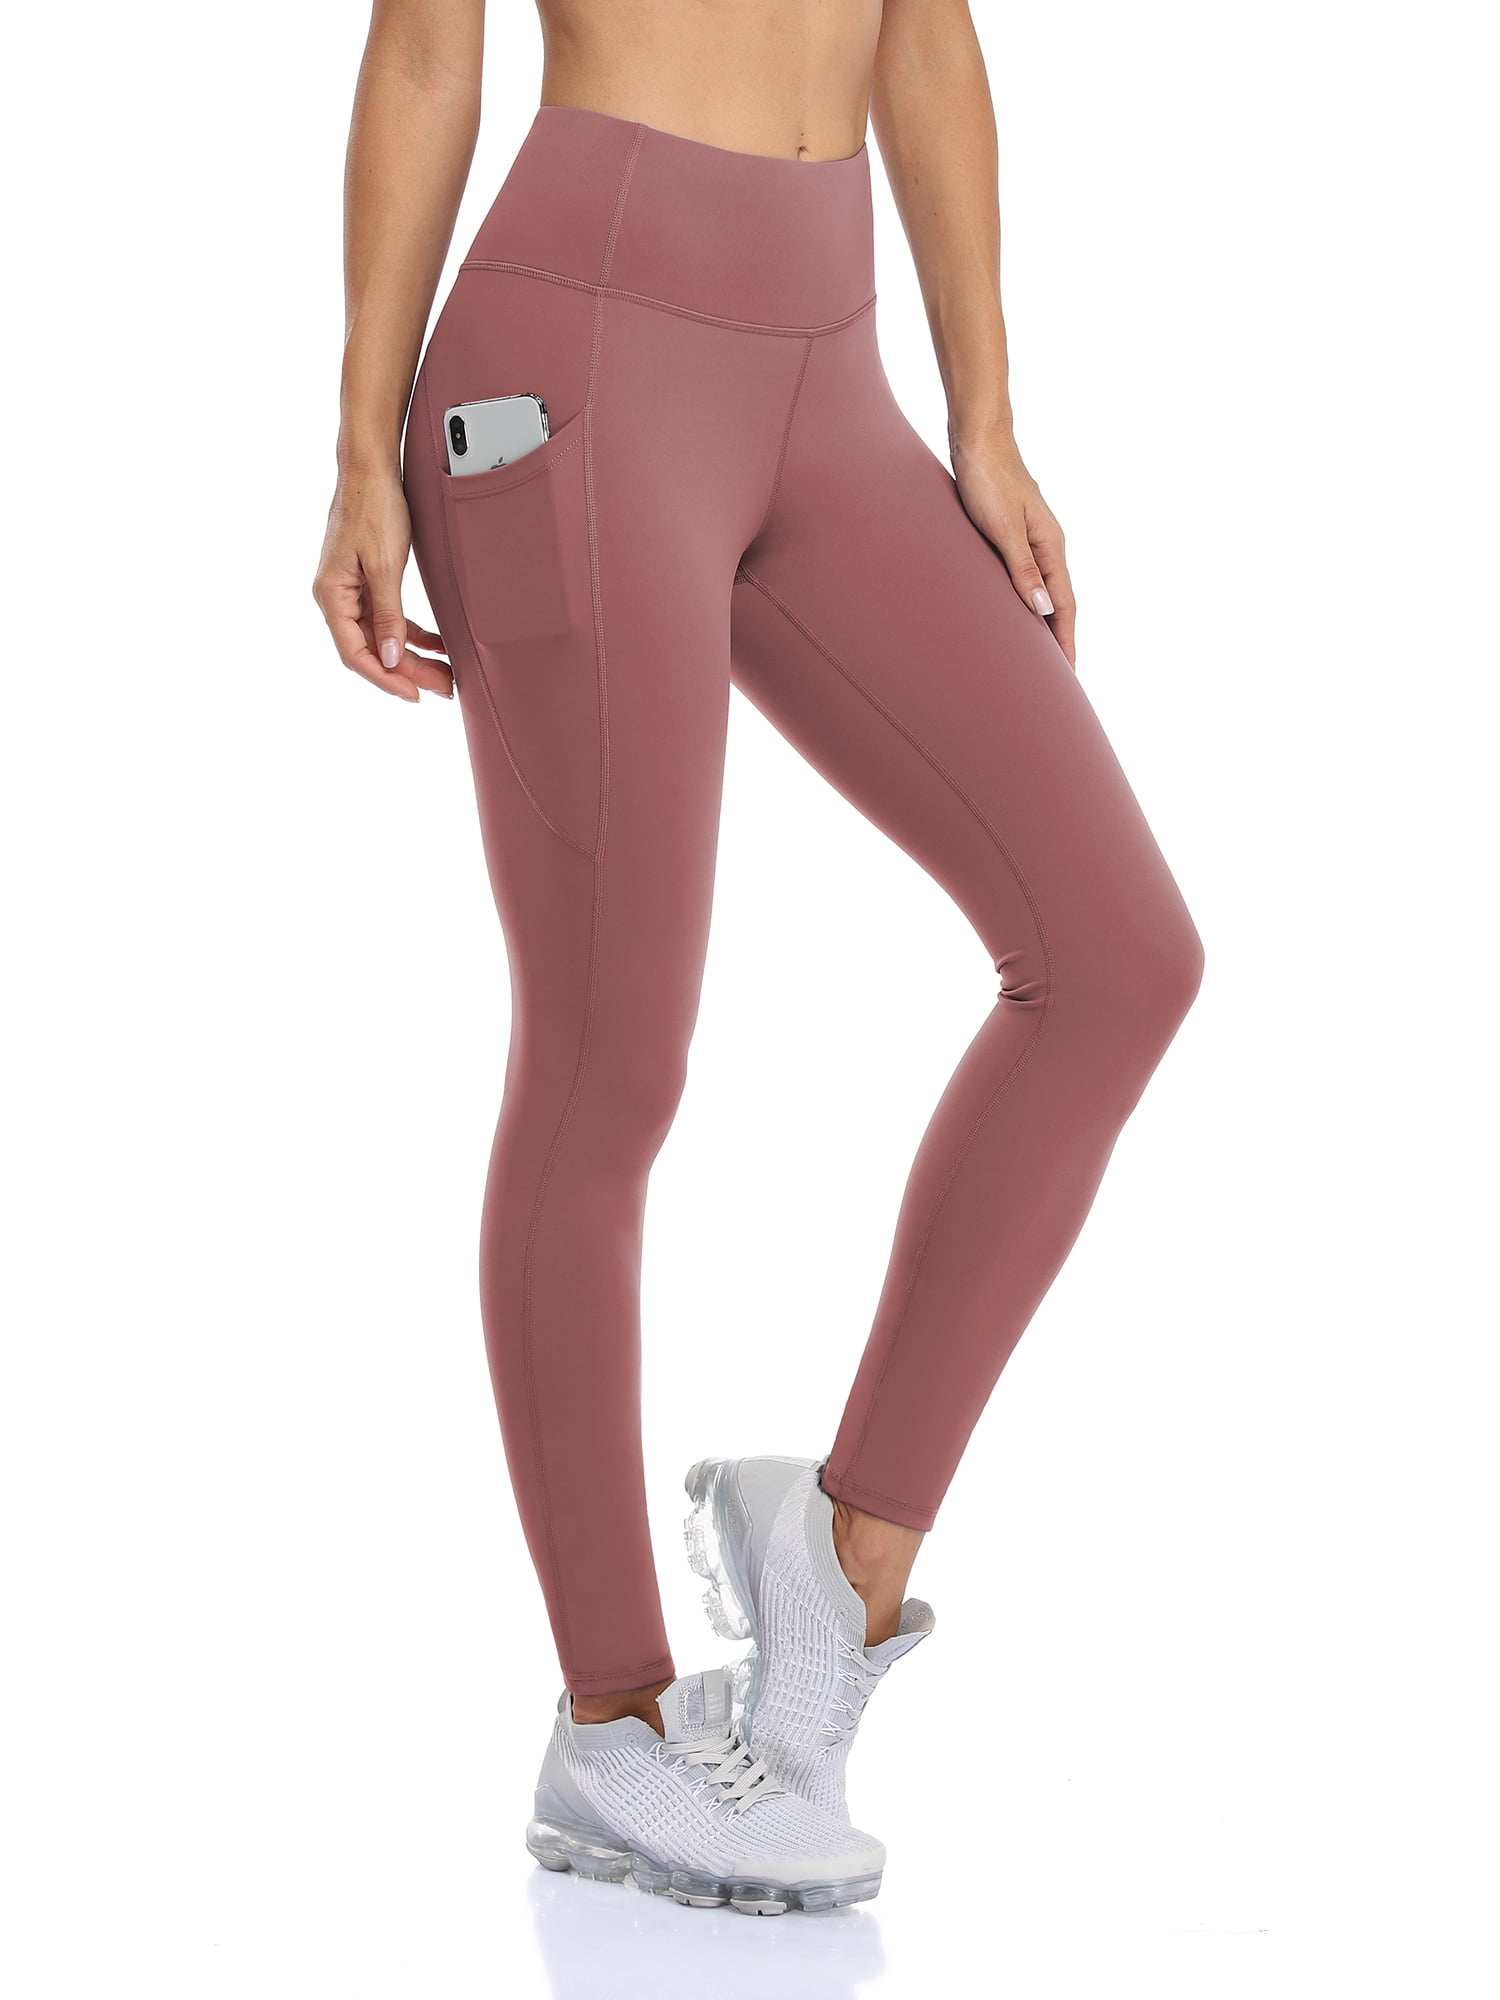 Women's High Rise Tight Yoga Pants Buttery Soft Legging With